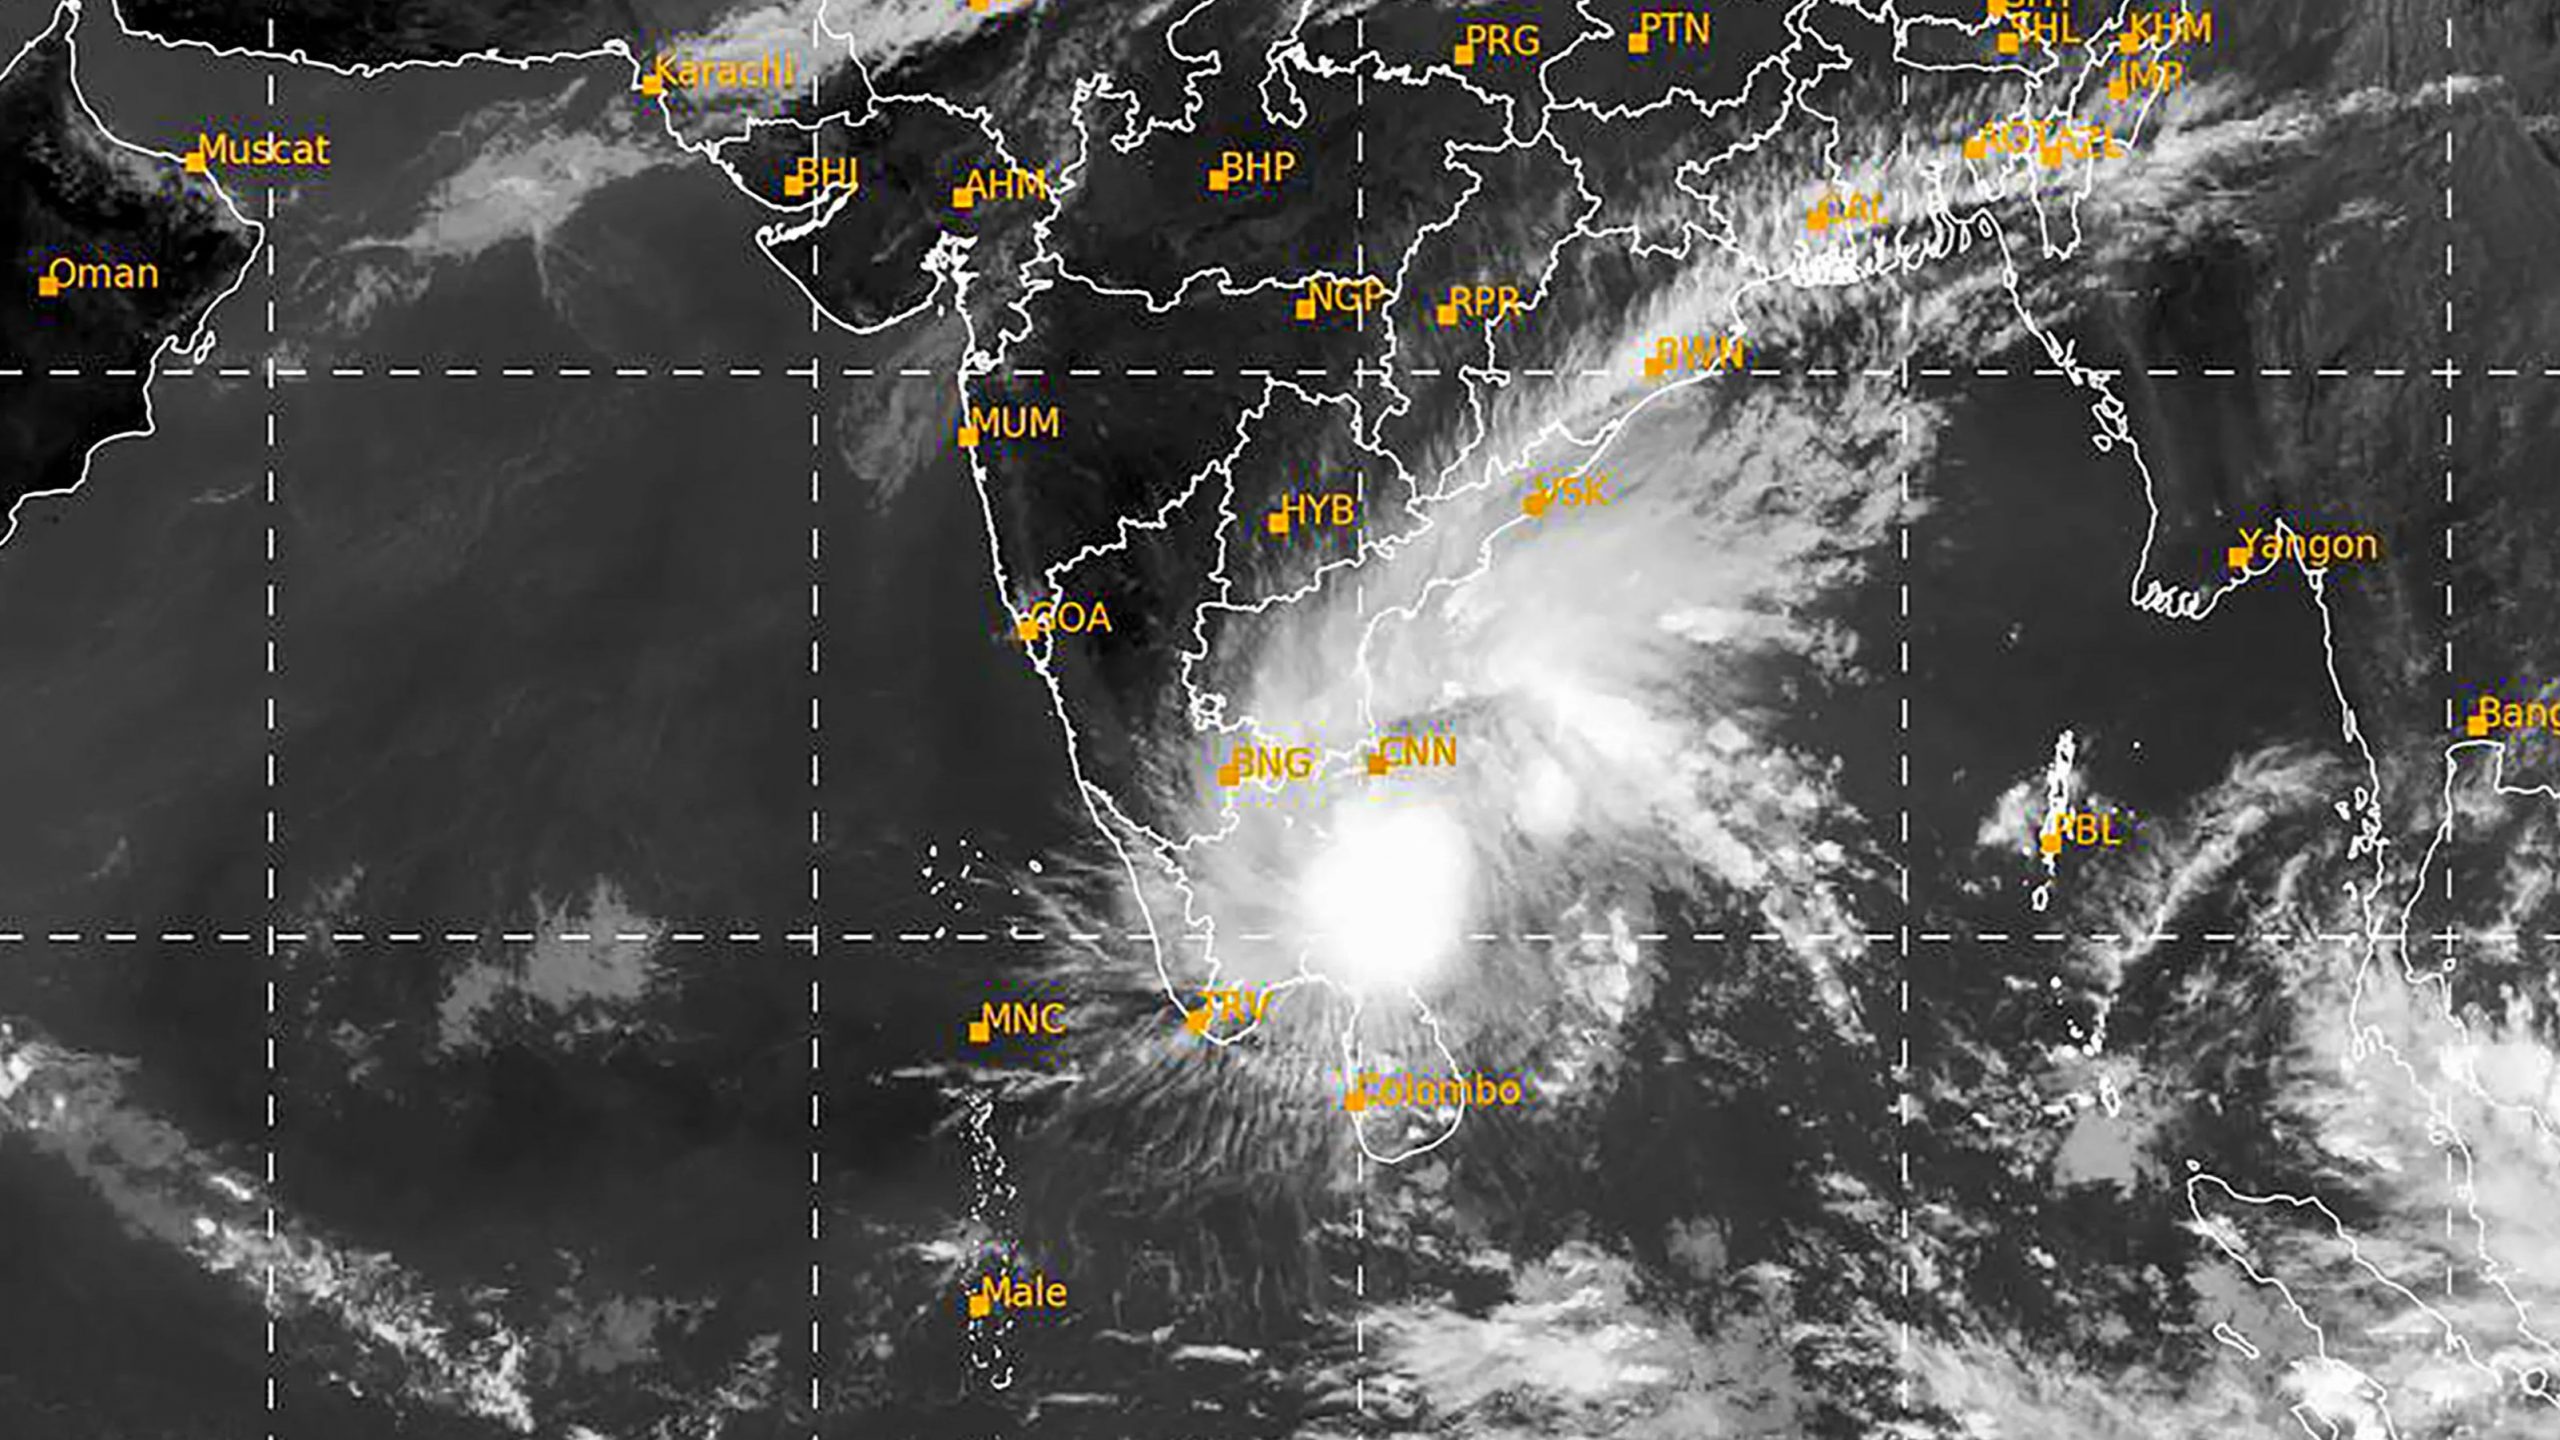 ‘Very severe’ Cyclone Nivar weakens to ‘severe’ after making landfall near Puducherry